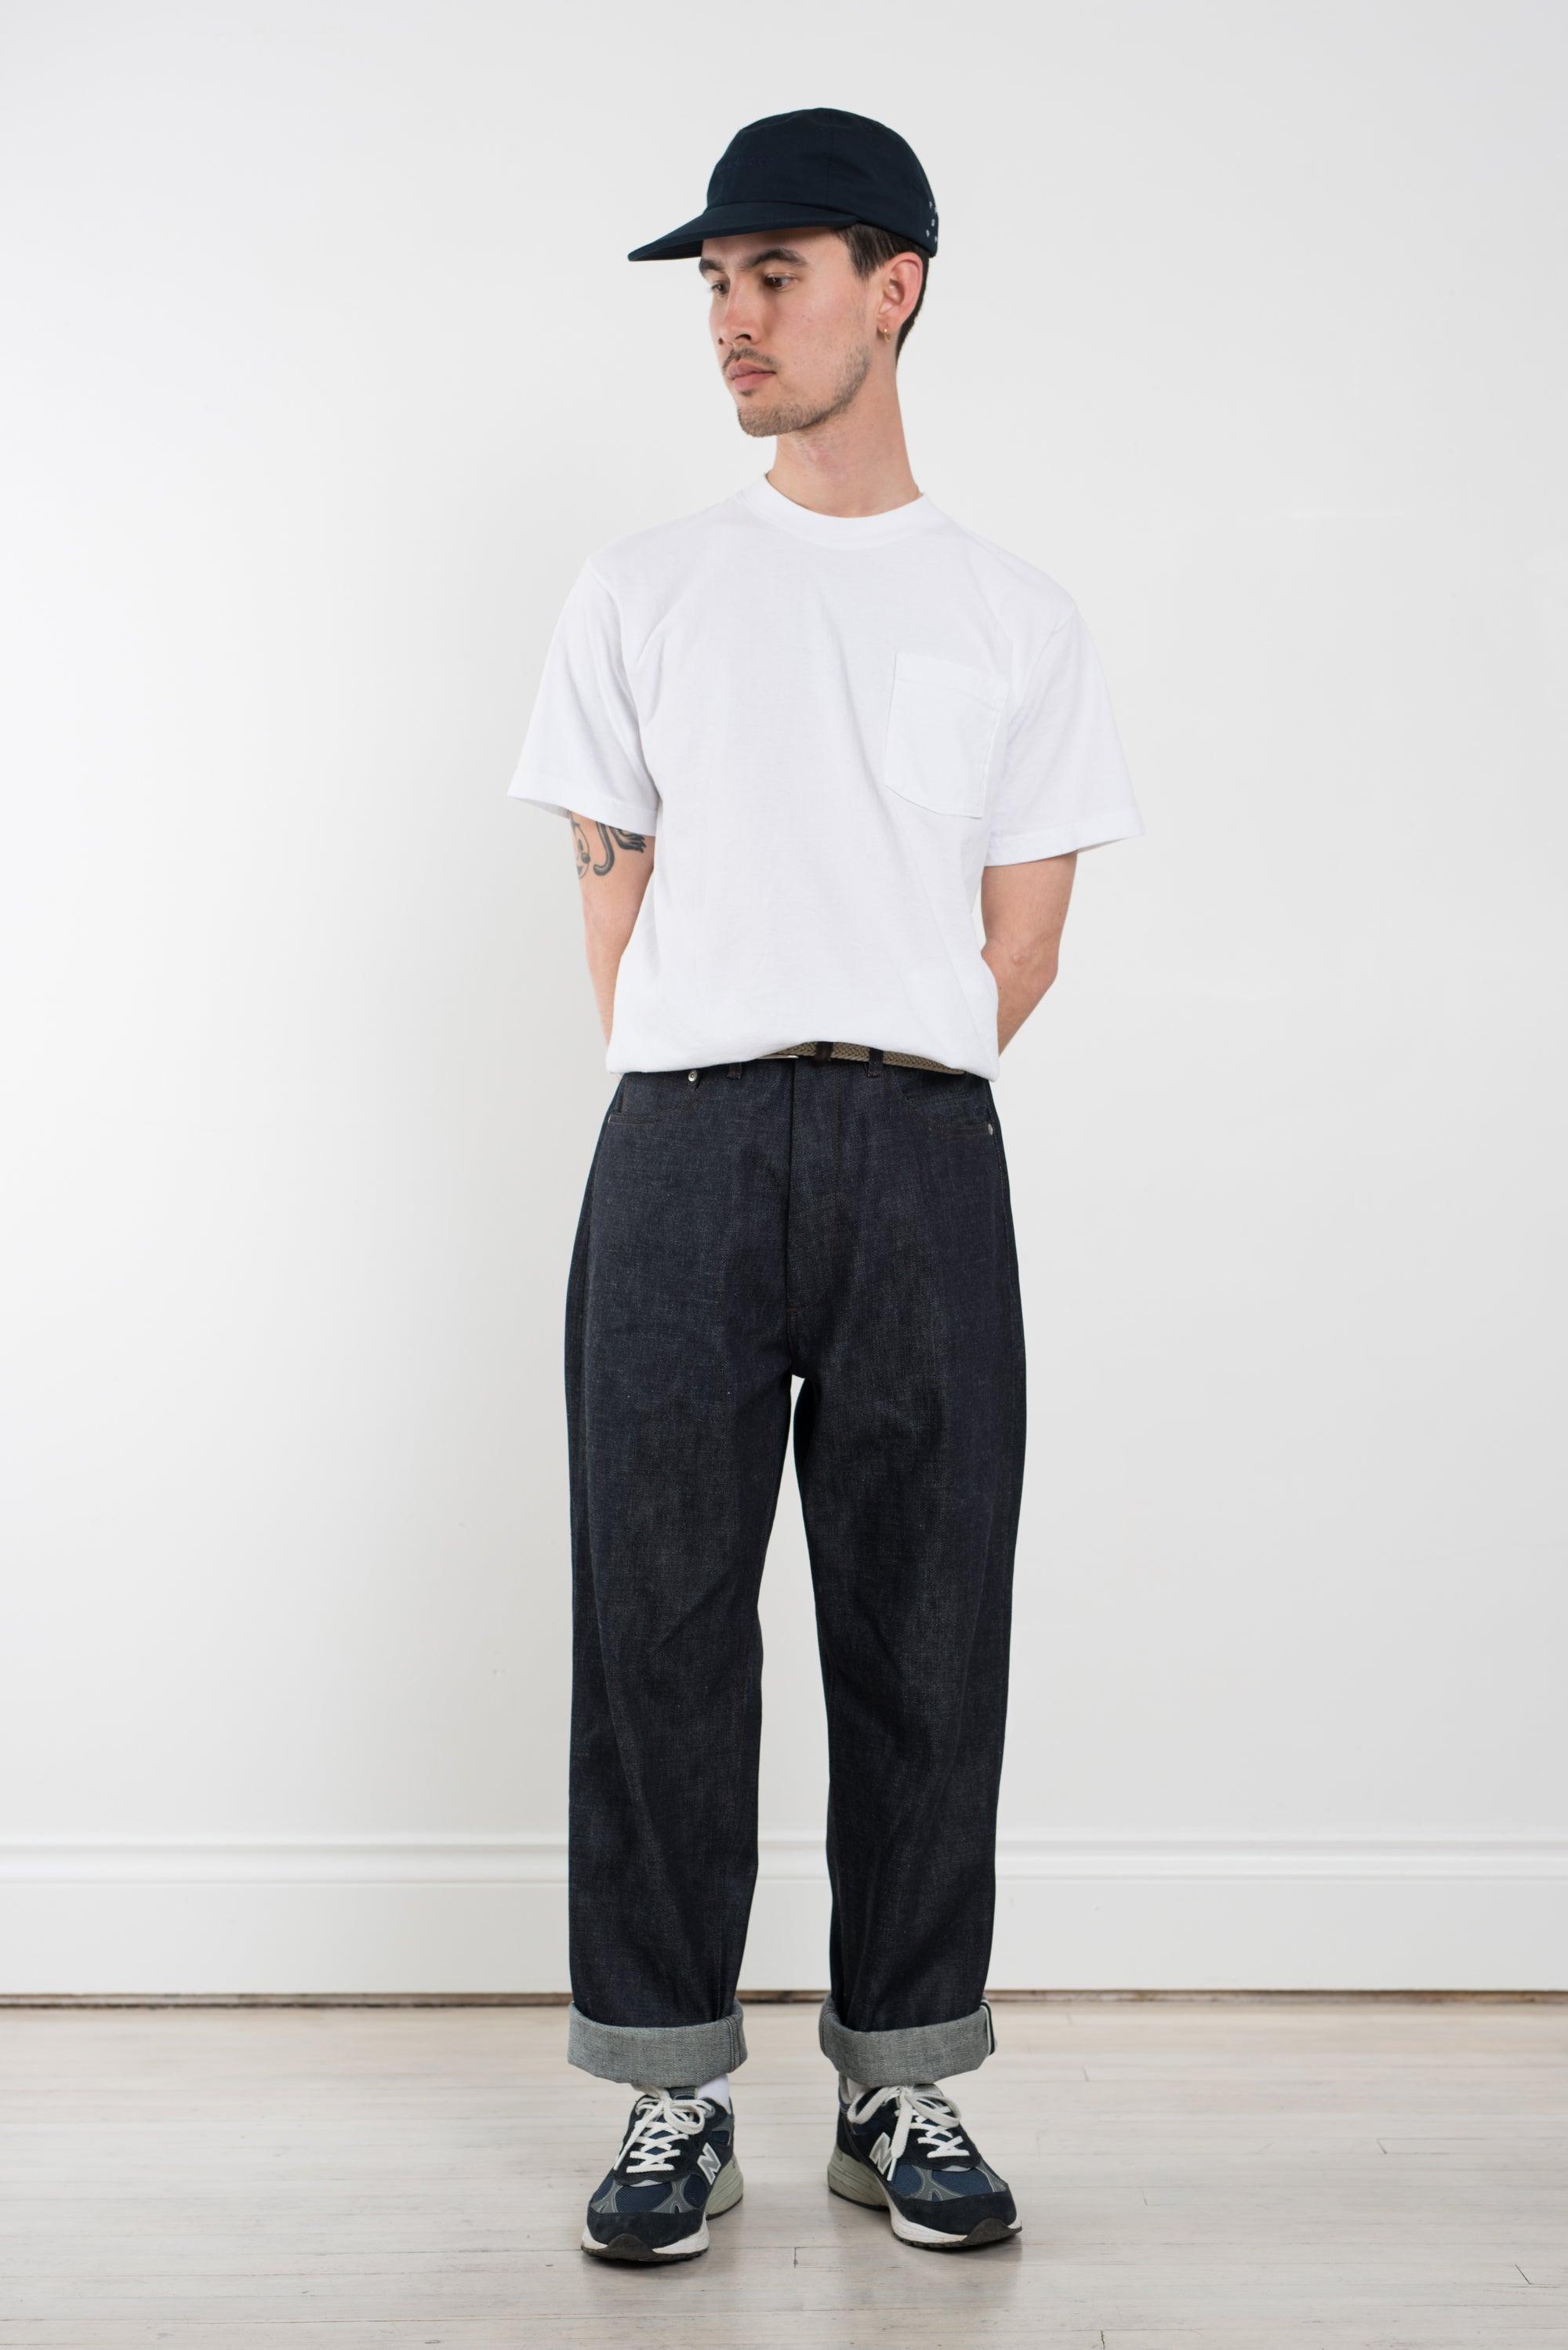 SALE／96%OFF】 ENDS and MEANS 5 pockets denim white kids-nurie.com